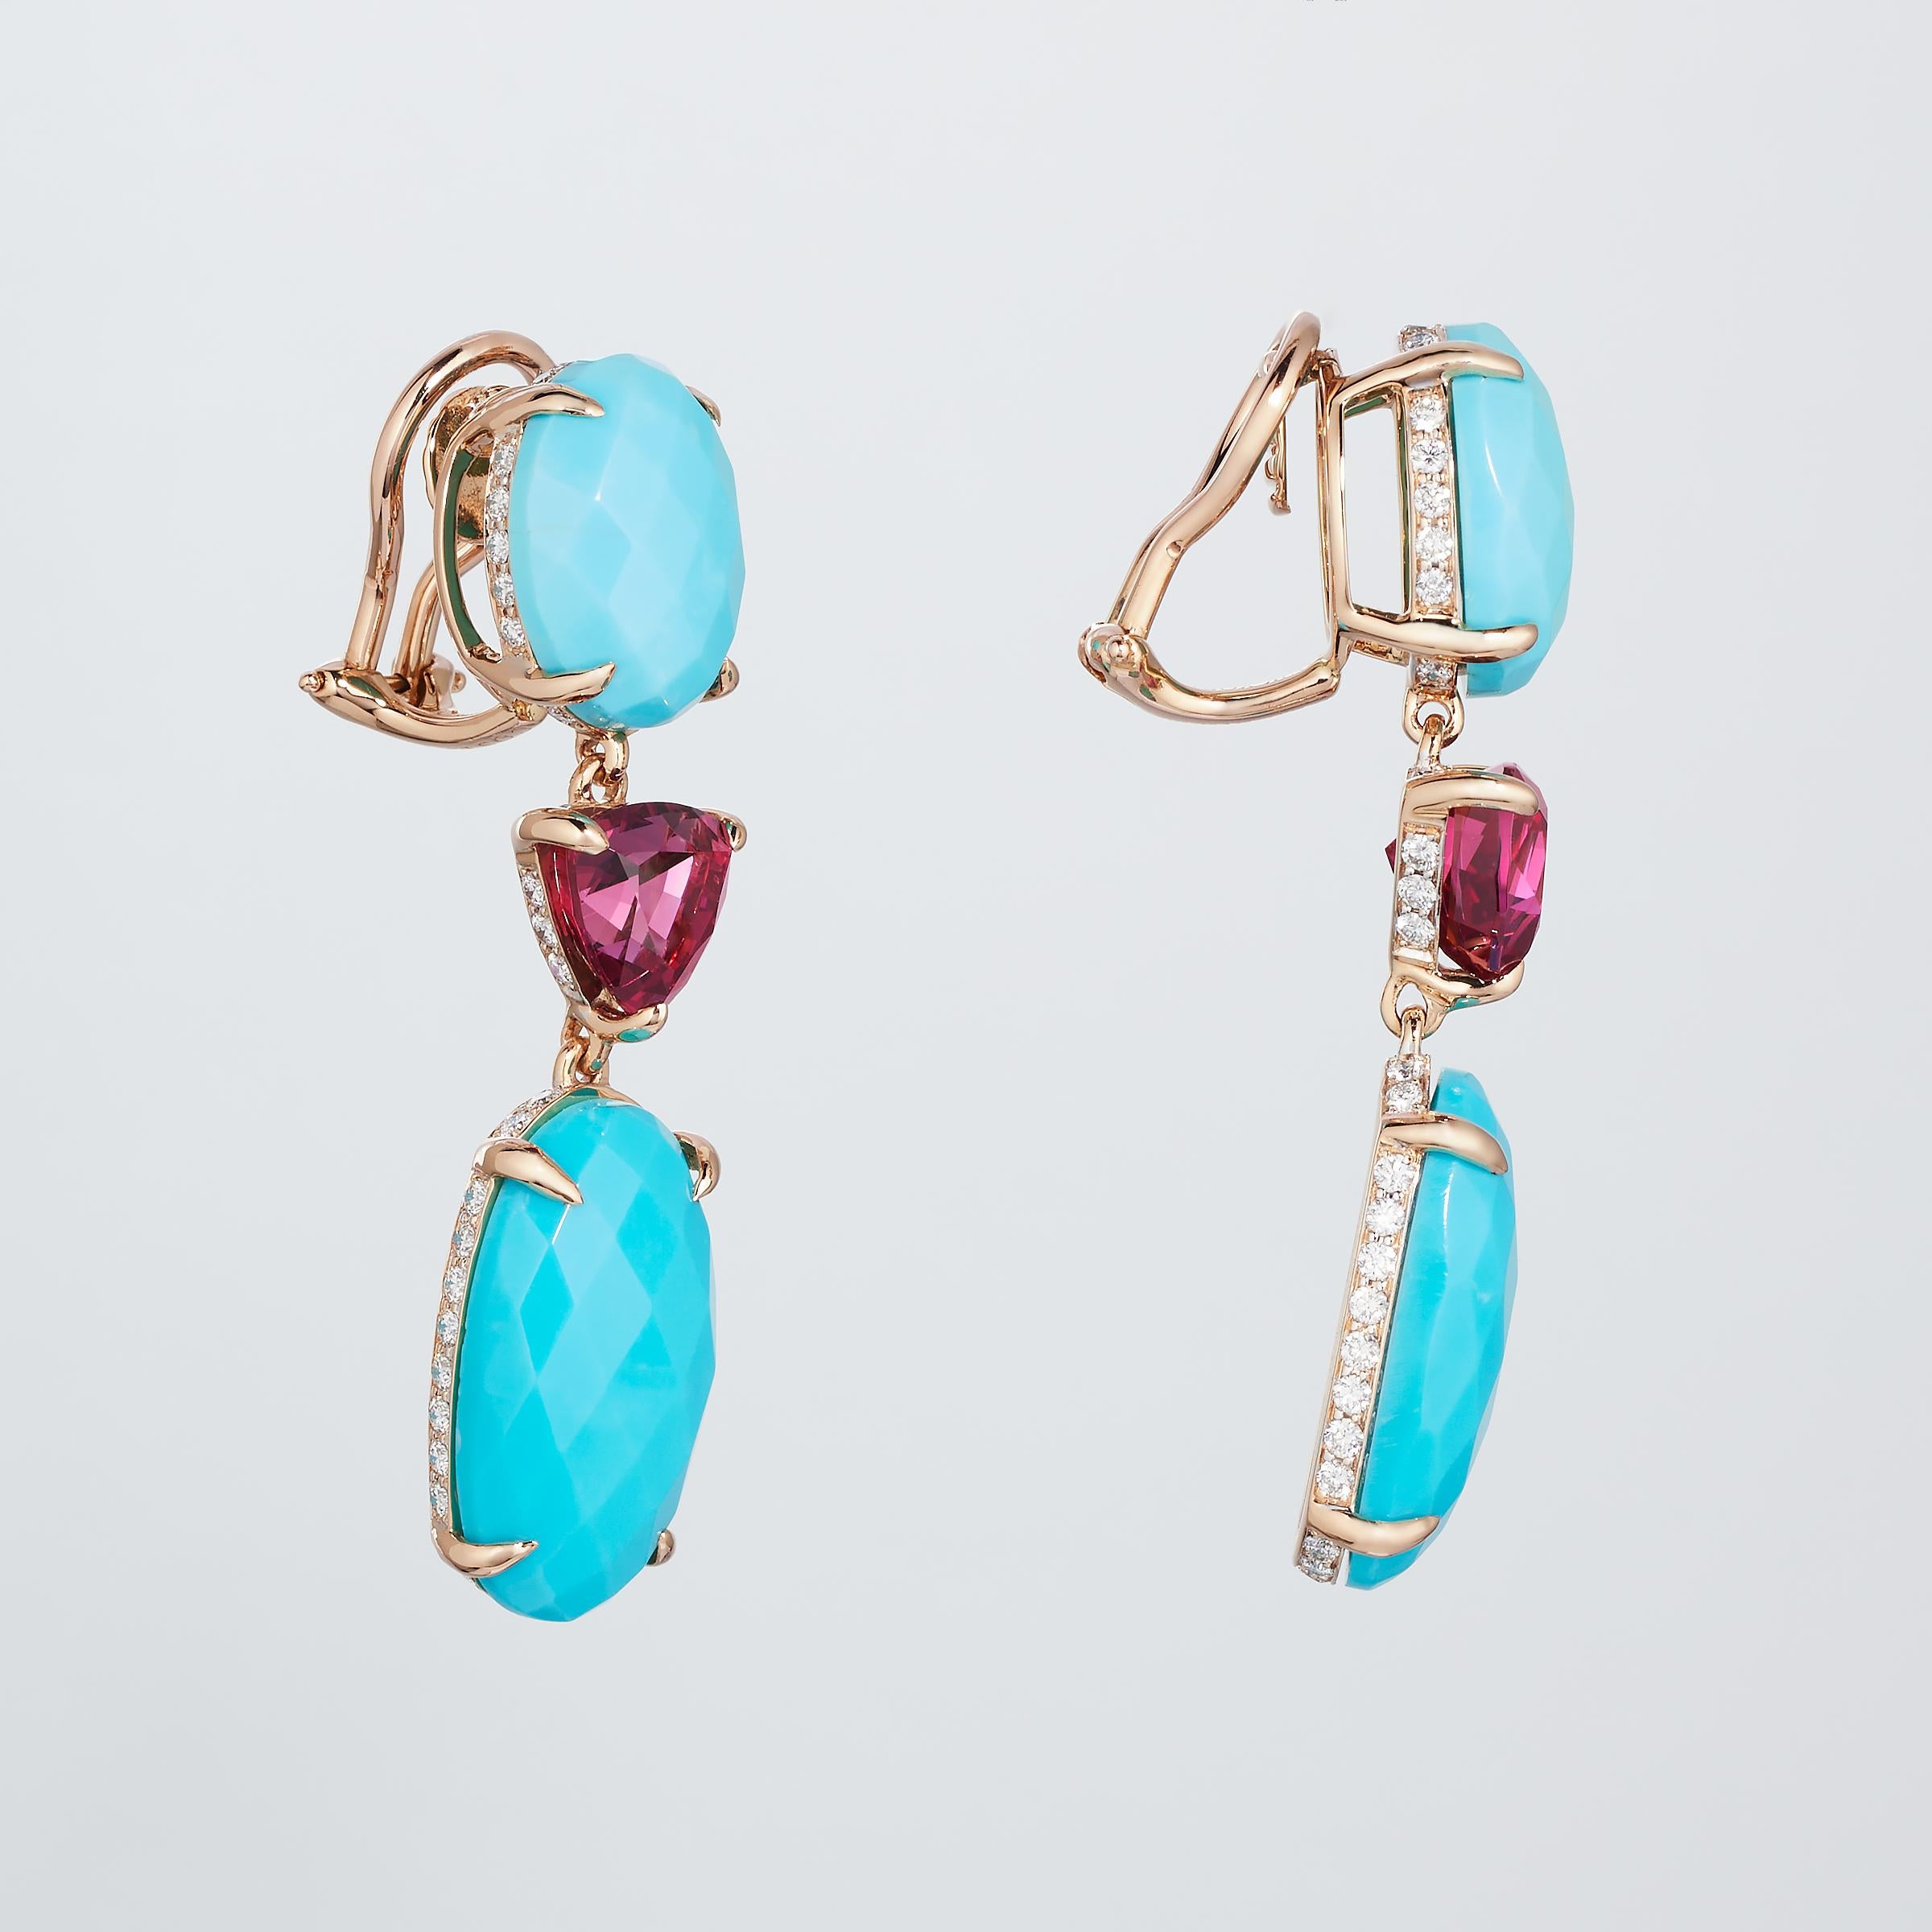 Fabulously stylish turquoise, pink tourmaline, and diamond dangle earrings from Paolo Costagli New York. Each earring features two oval turquoises of highest grade that exhibit a captivating intense sky-blue color. The turquoises are faceted in an